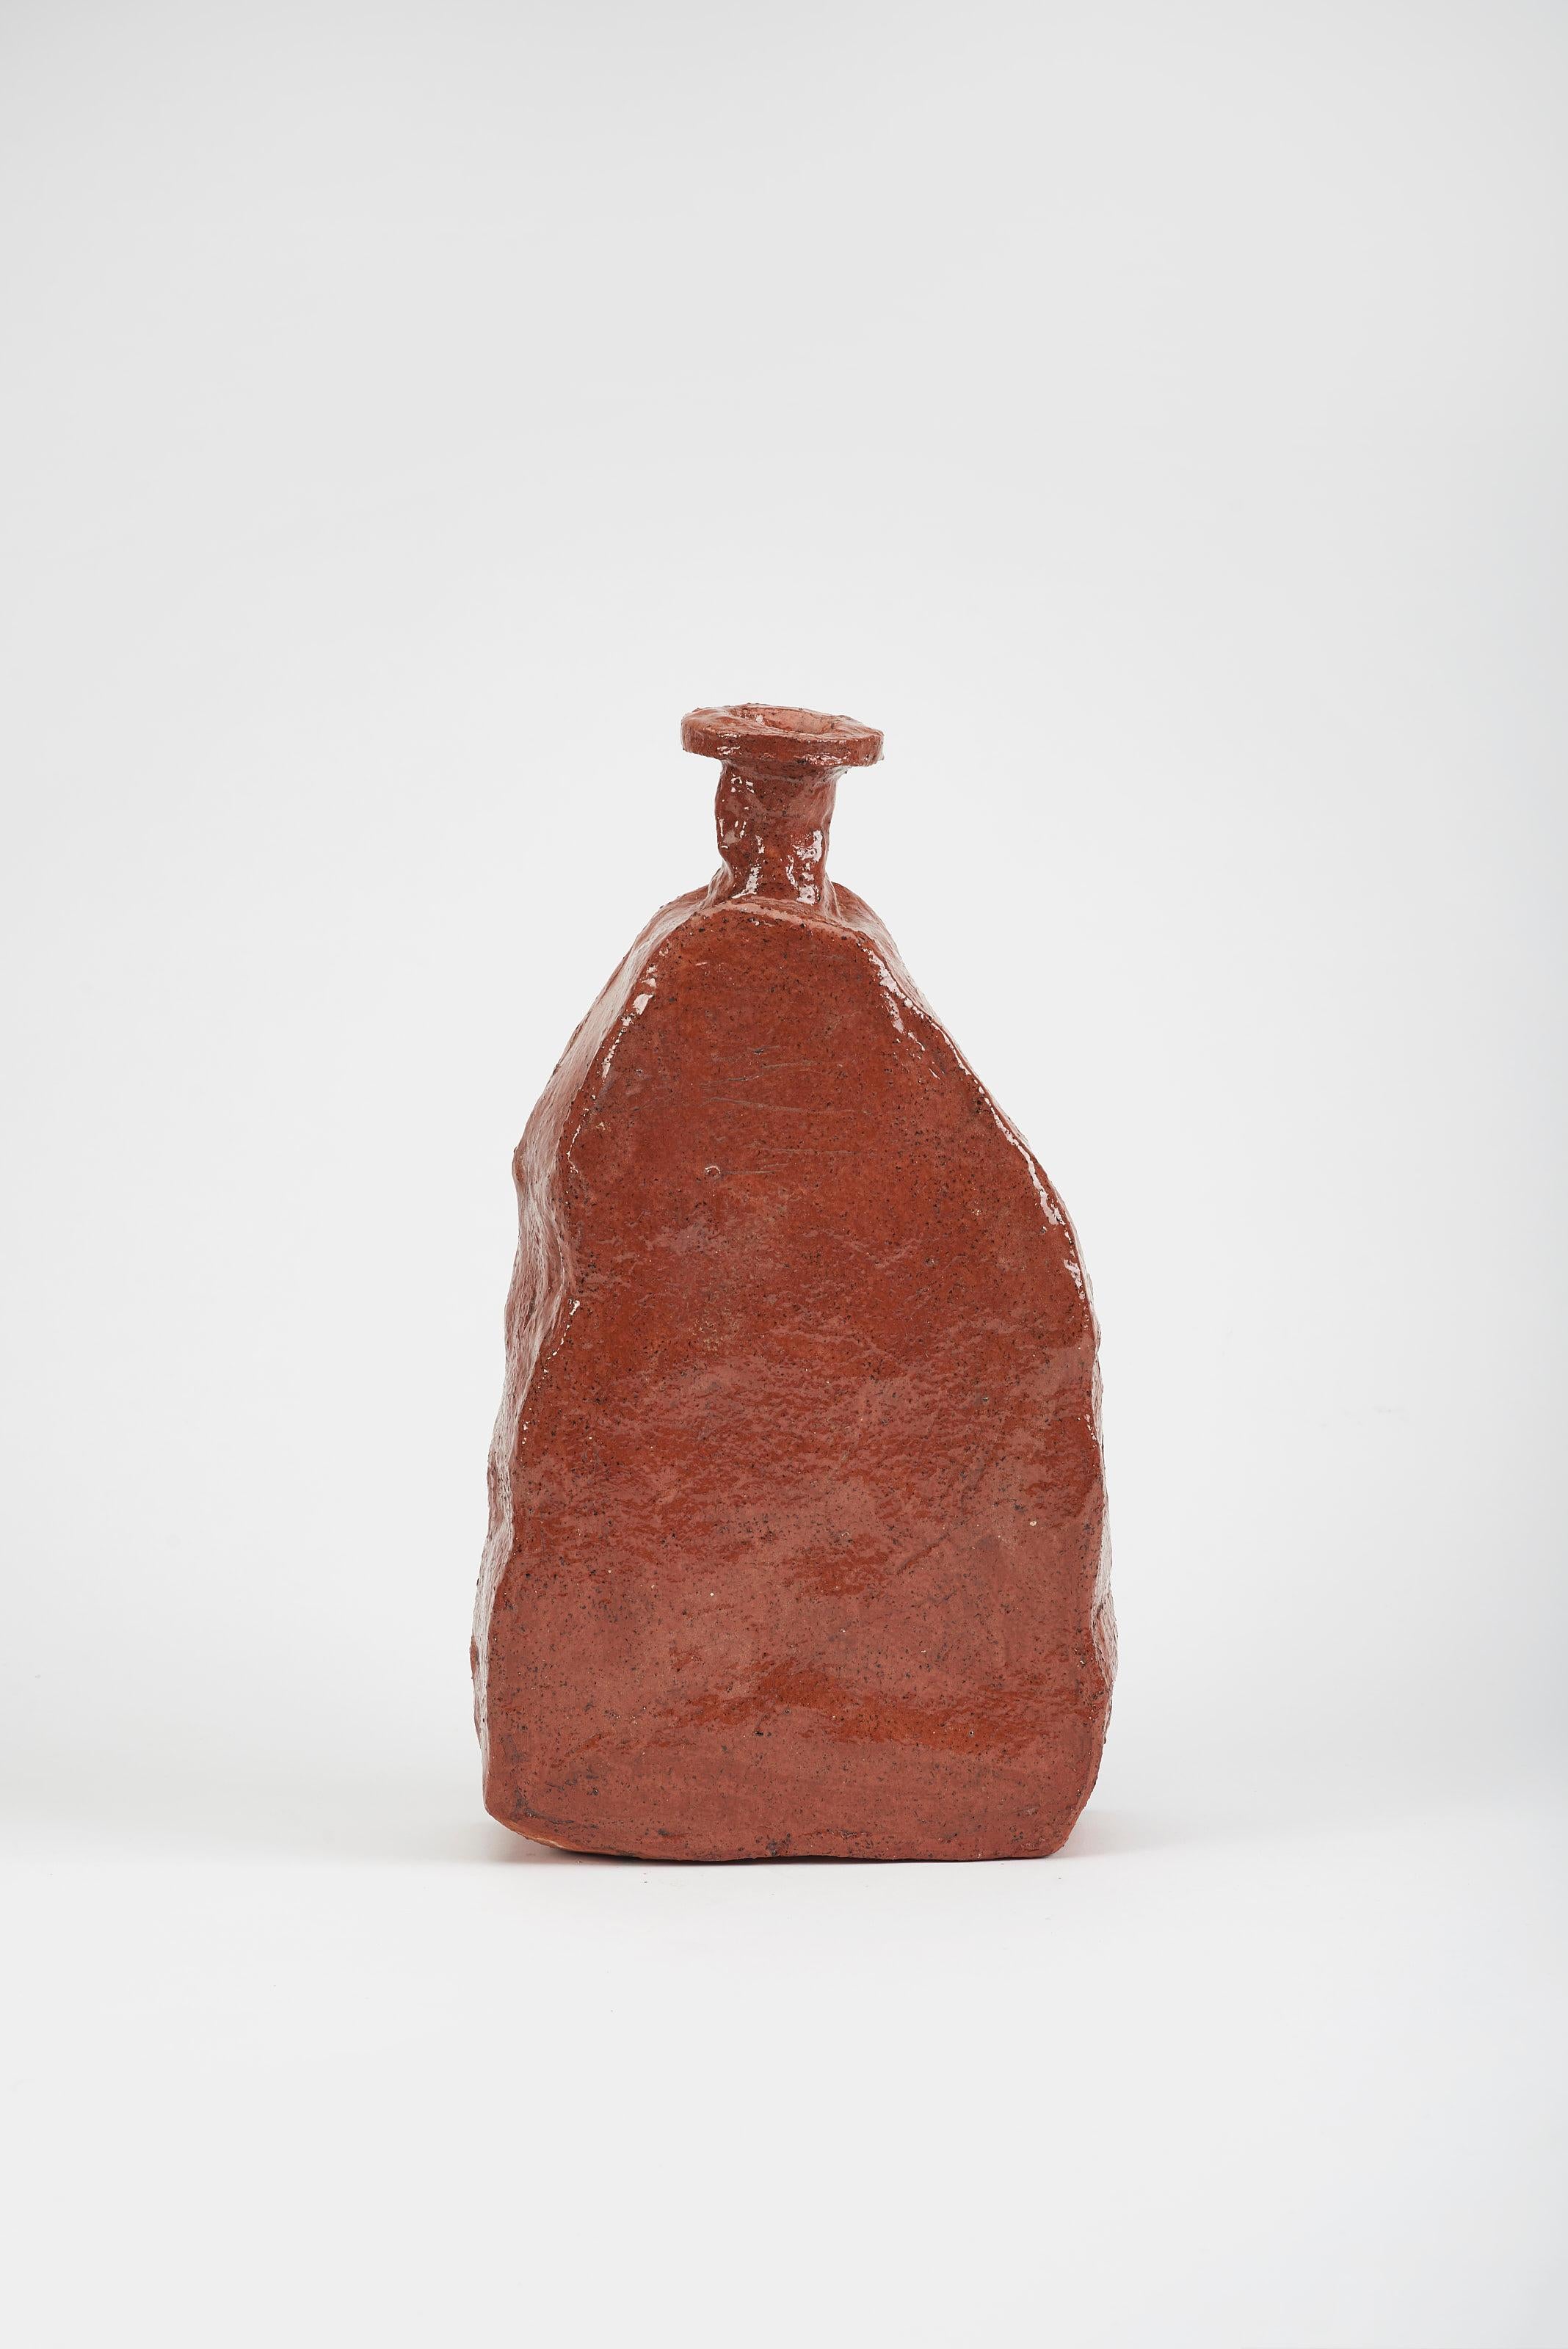 Aloi Medium Vase by Willem Van Hooff
Dimensions: W 35 x D 10 x H 35 cm (Dimensions may vary as pieces are hand-made and might present slight variations in sizes)
Material: Glazed Ceramics

Core is a serie of vessels. Inspired by prehistoric african